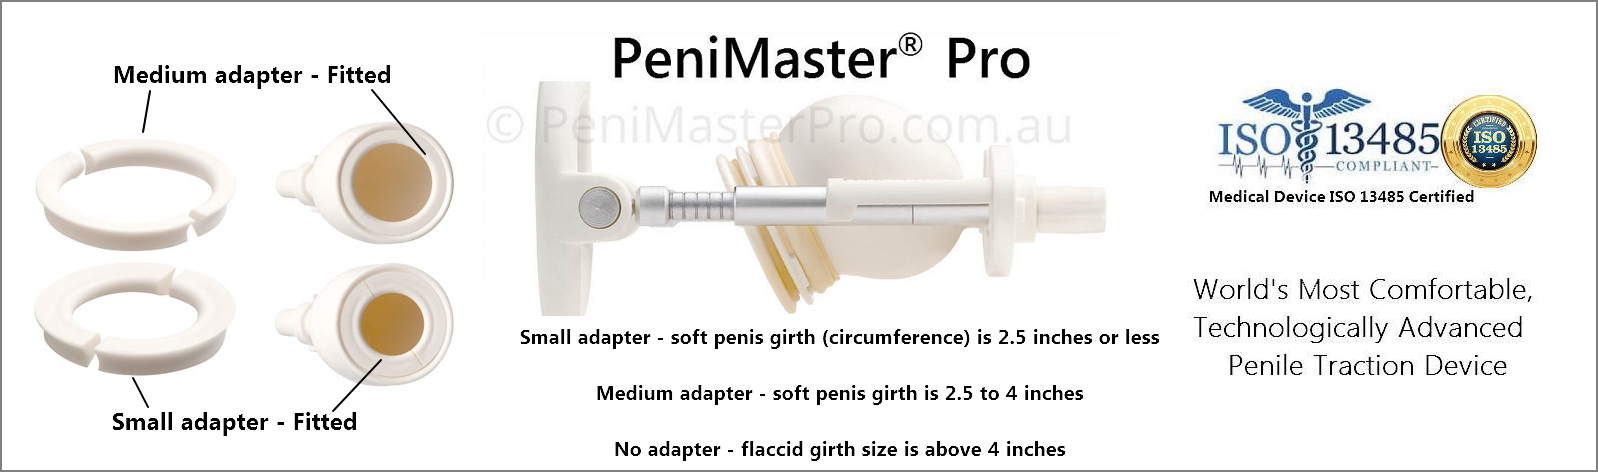 PeniMaster Pro One Size Fits All